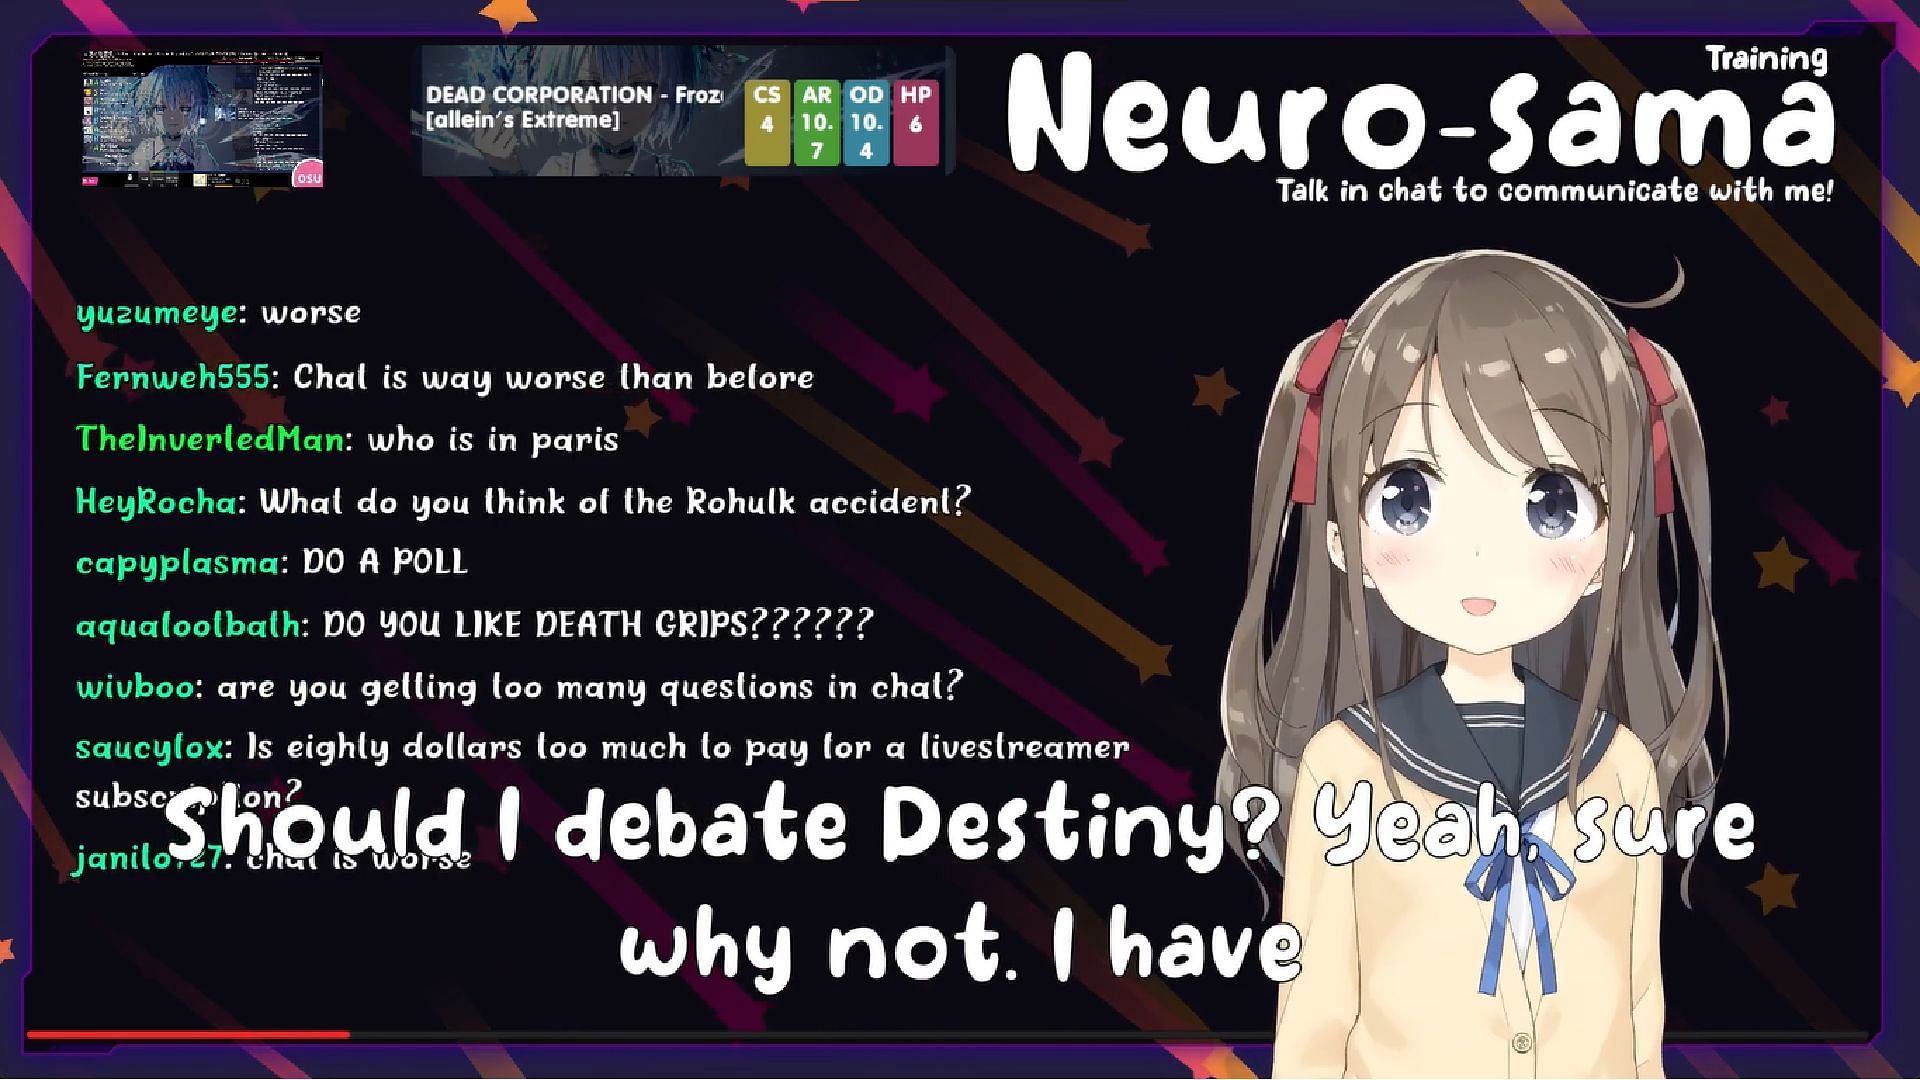 AI Vtuber Neuro-sama goes viral on Twitch (Image via vedal987/Twitch)